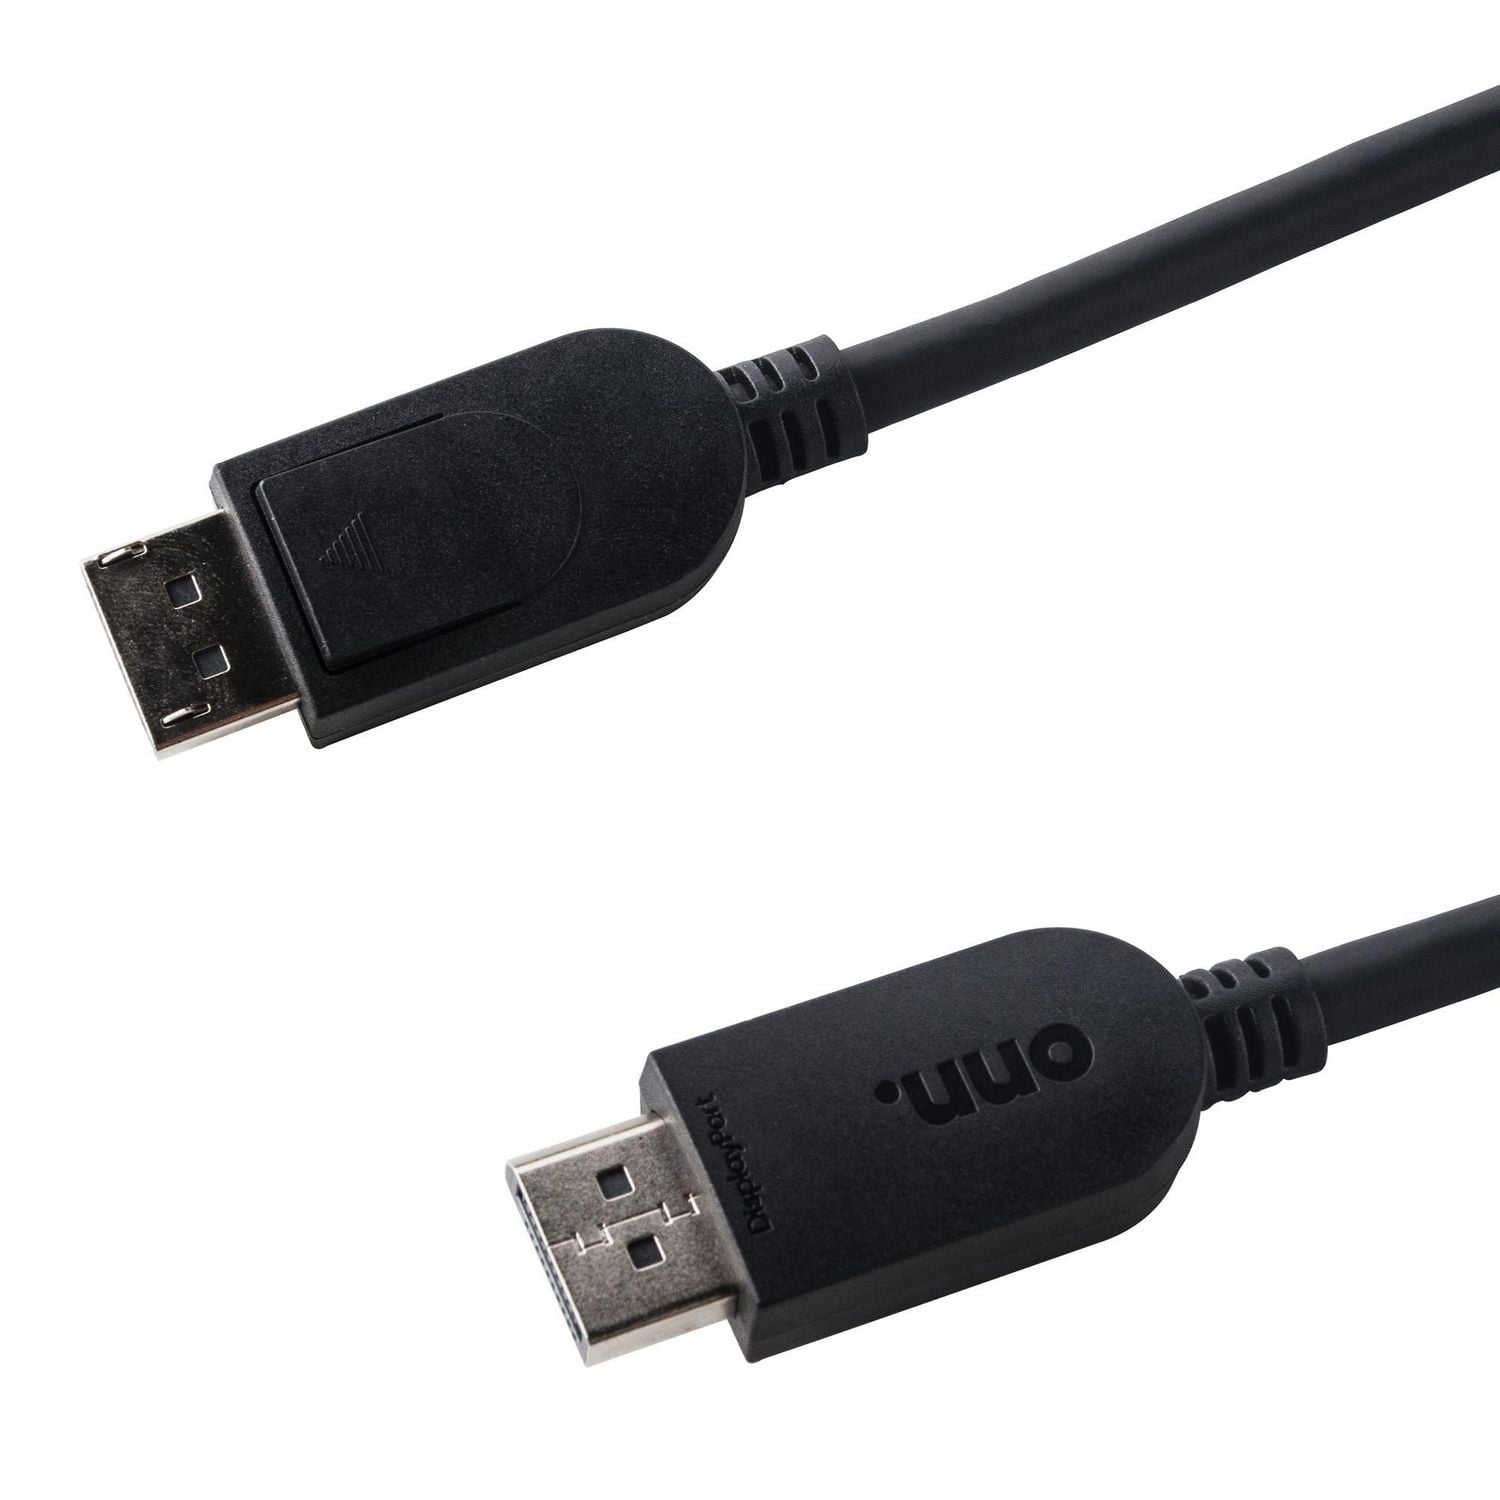 onn. 6FT./1.8 m USB-C to HDMI Cable, Compatible with 4K 